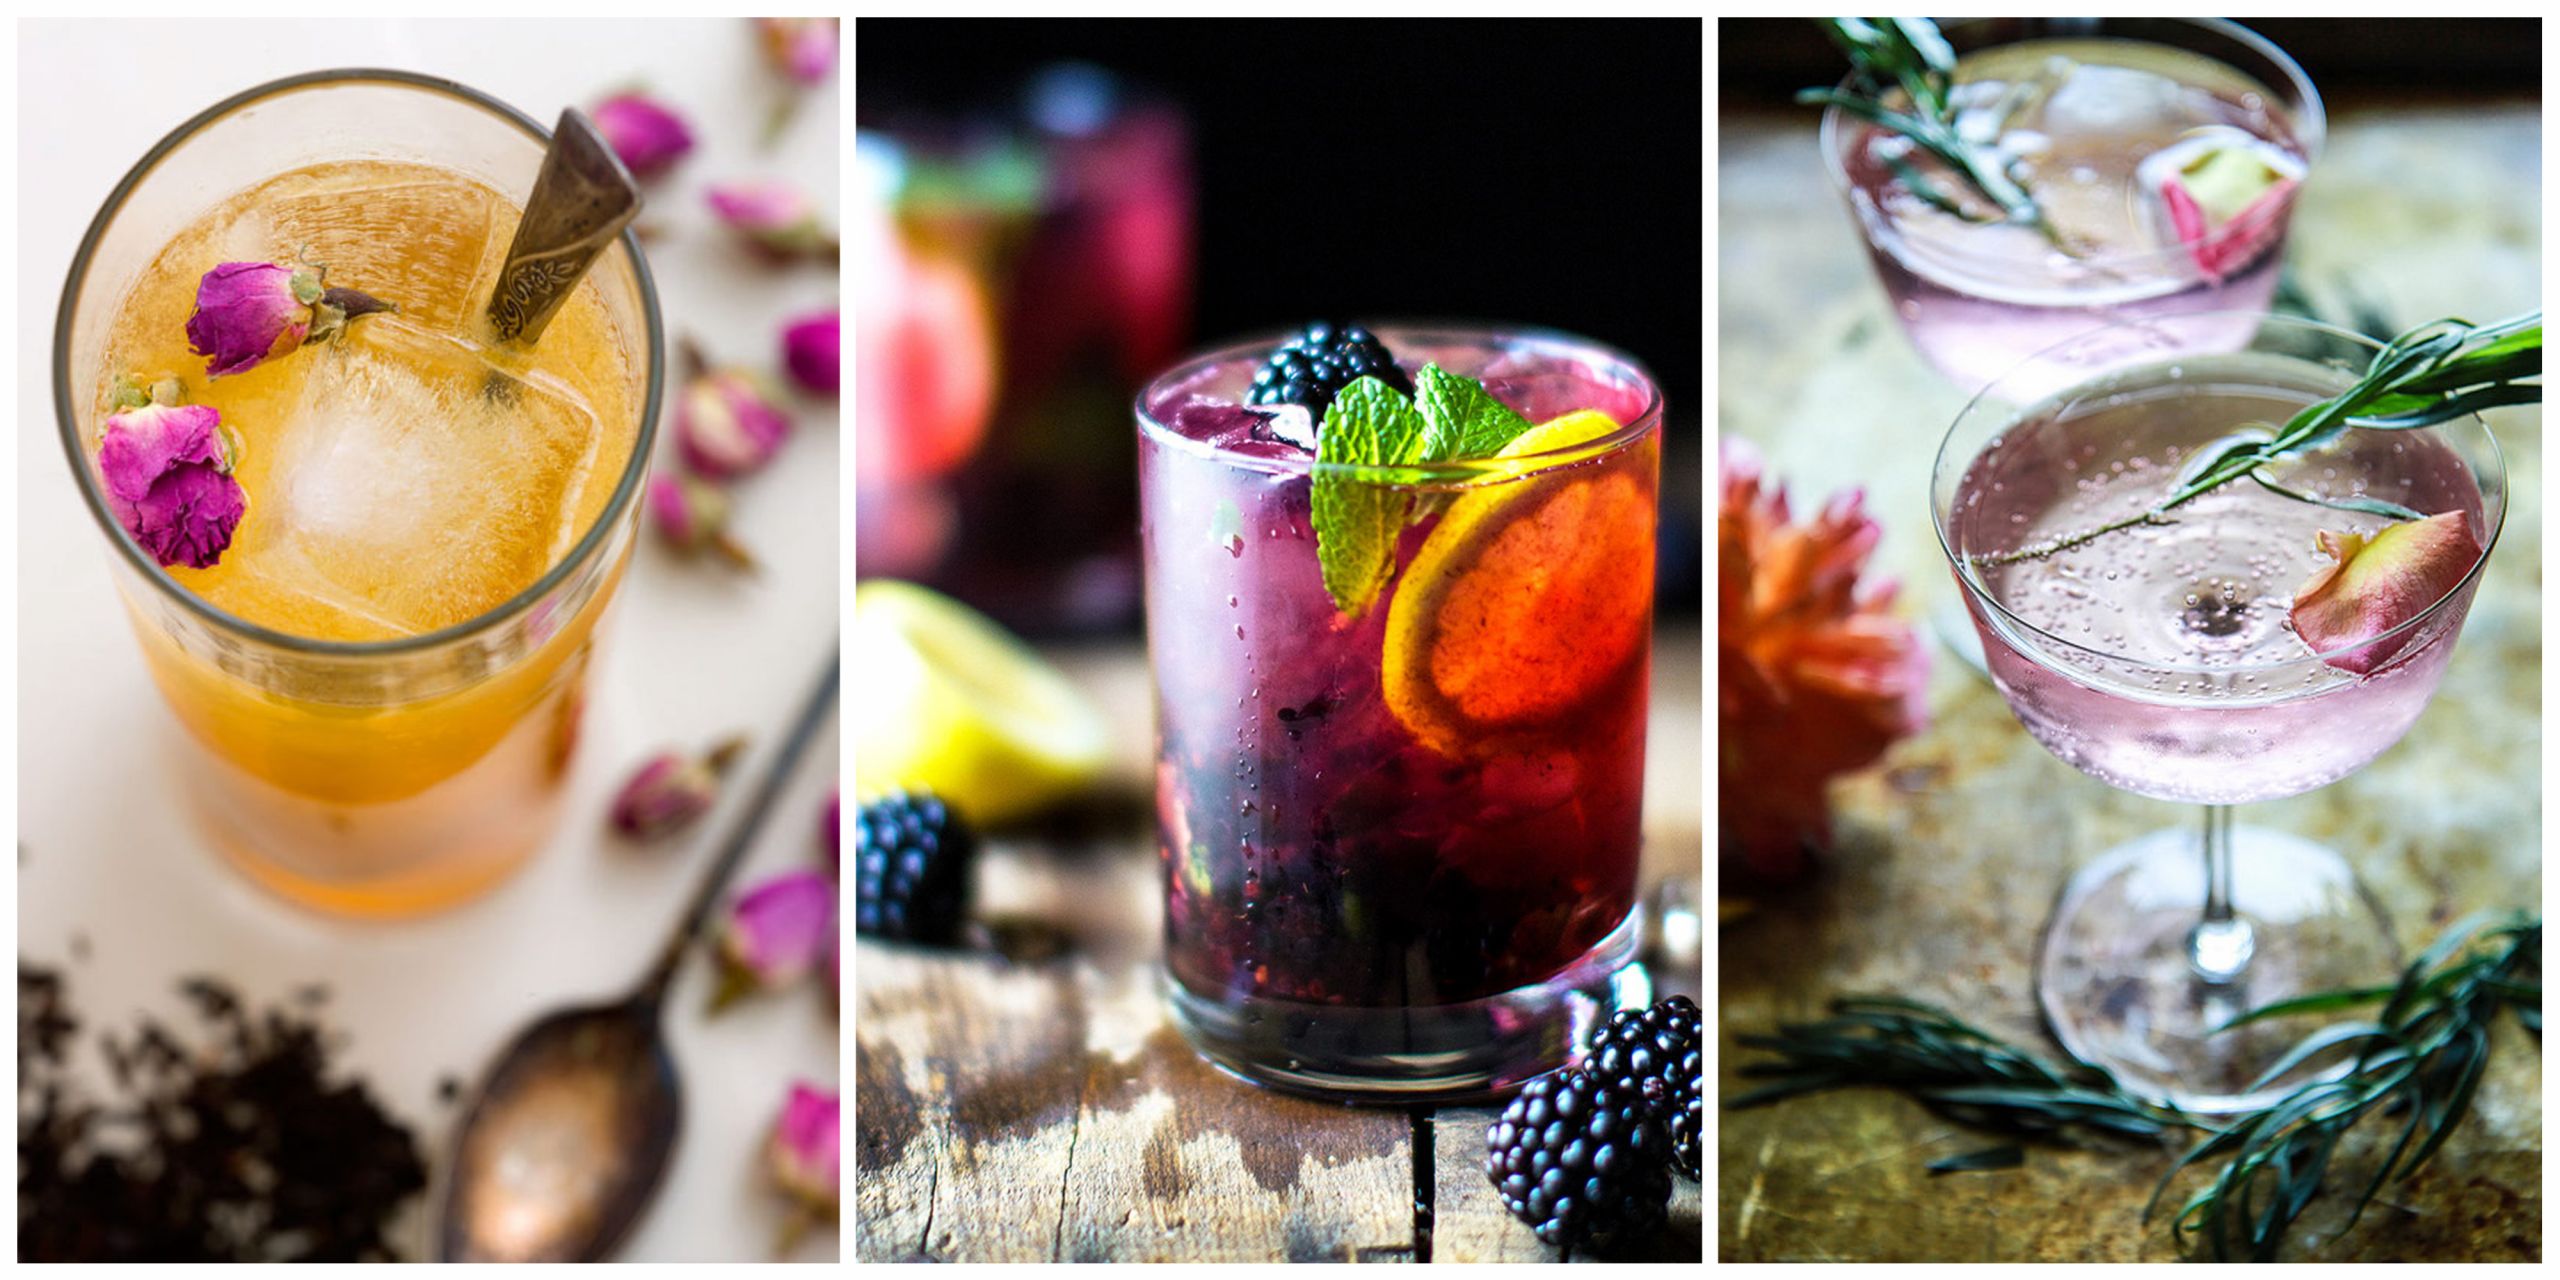 Popular Gin Drinks
 10 Delicious Gin Cocktails Refreshing Gin Drink Recipes